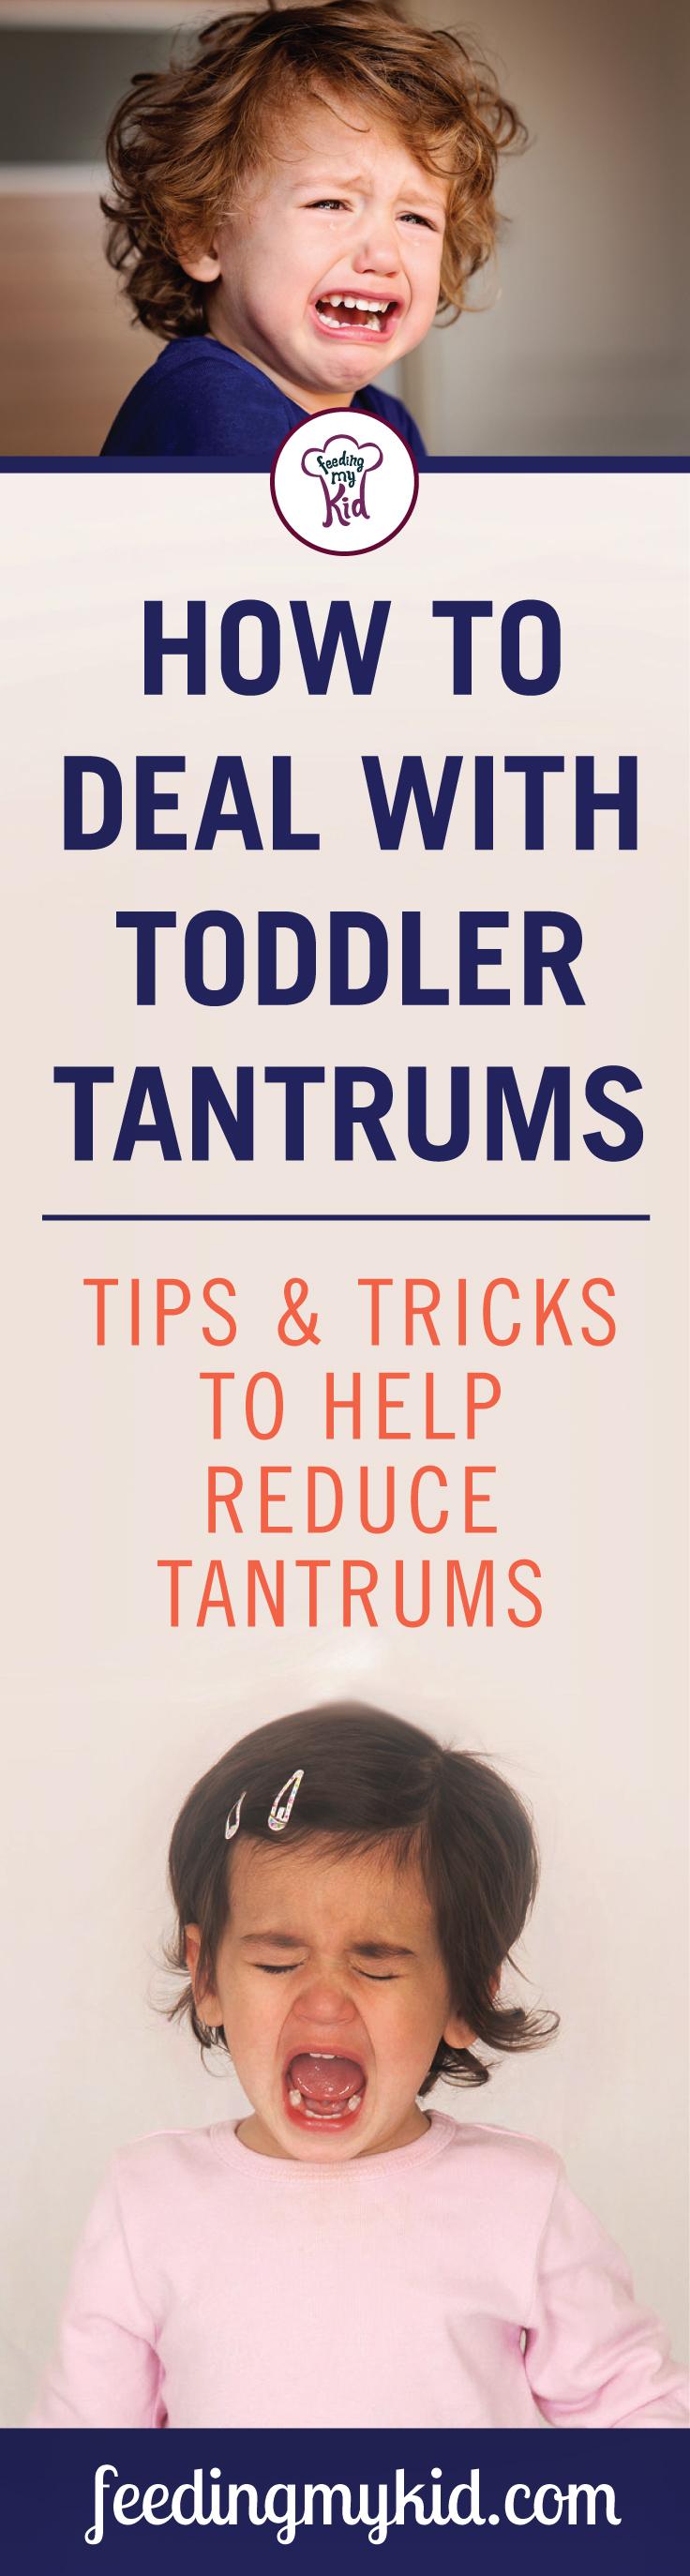 How To Deal With Toddler Tantrums. Tips & Tricks To Help Reduce Tantrums